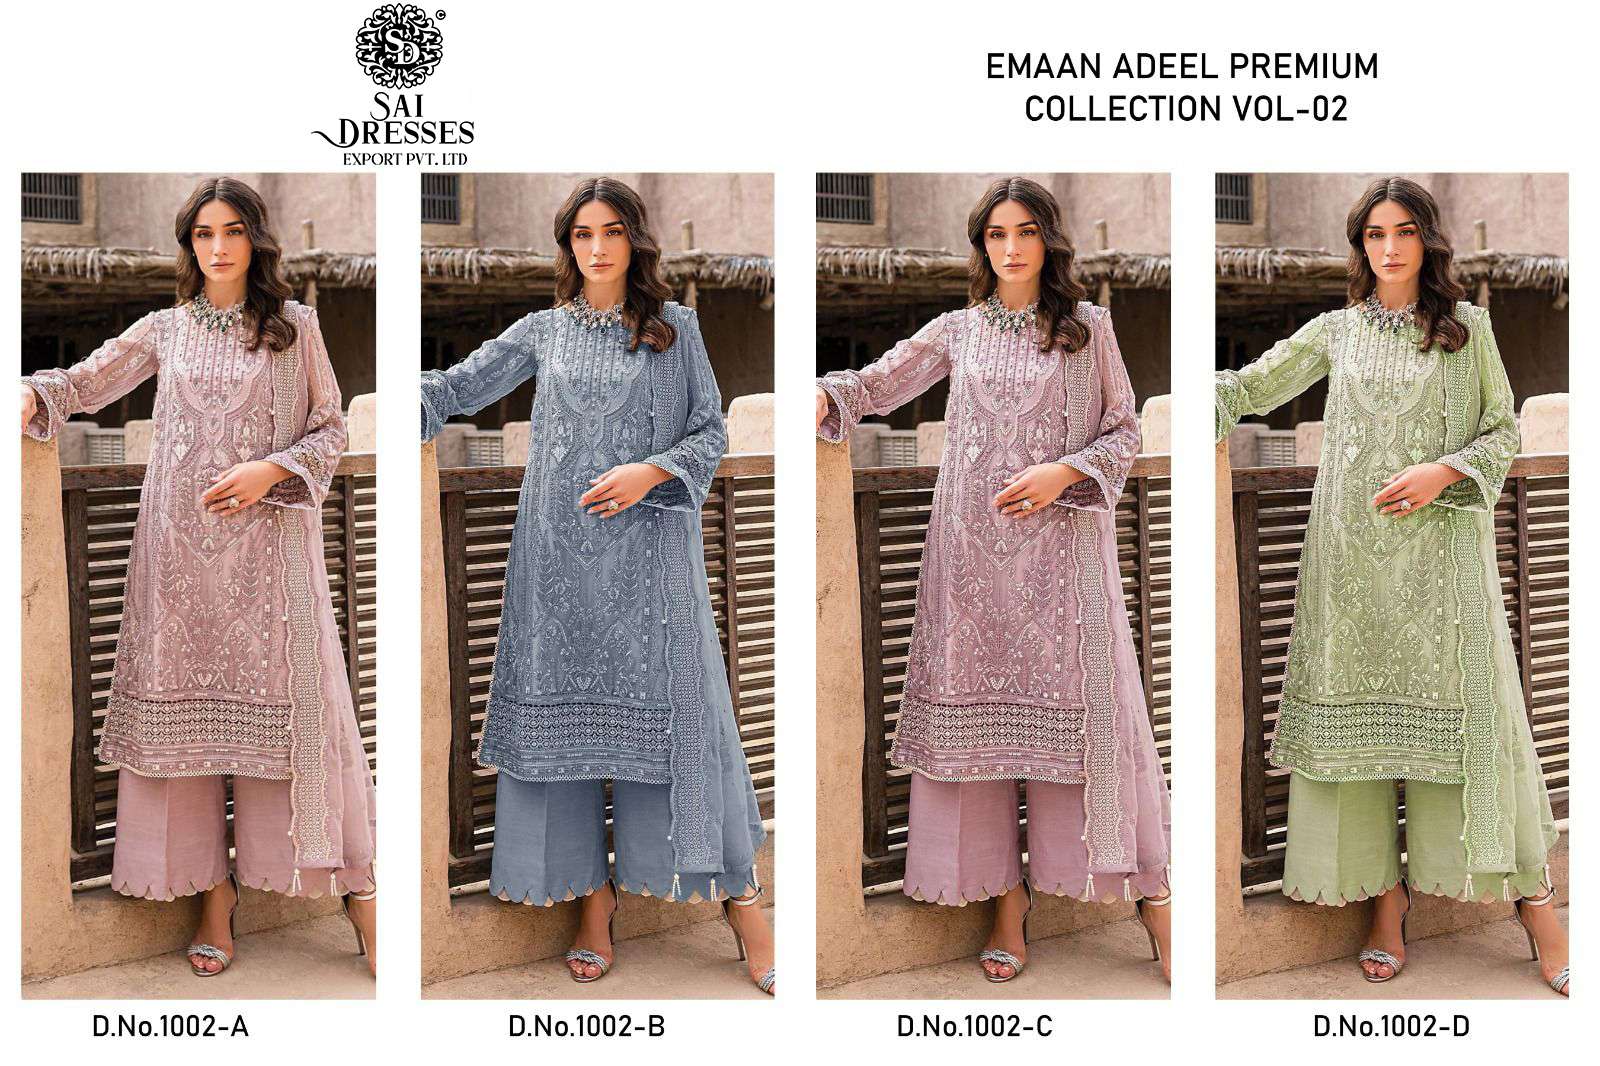 SAI DRESSES PRESENT EMAAN ADEEL PREMIUM COLLECTION VOL 2 SEMI STITCHED PARTY WEAR PAKISTANI DESIGNER SUITS IN WHOLESALE RATE IN SURAT